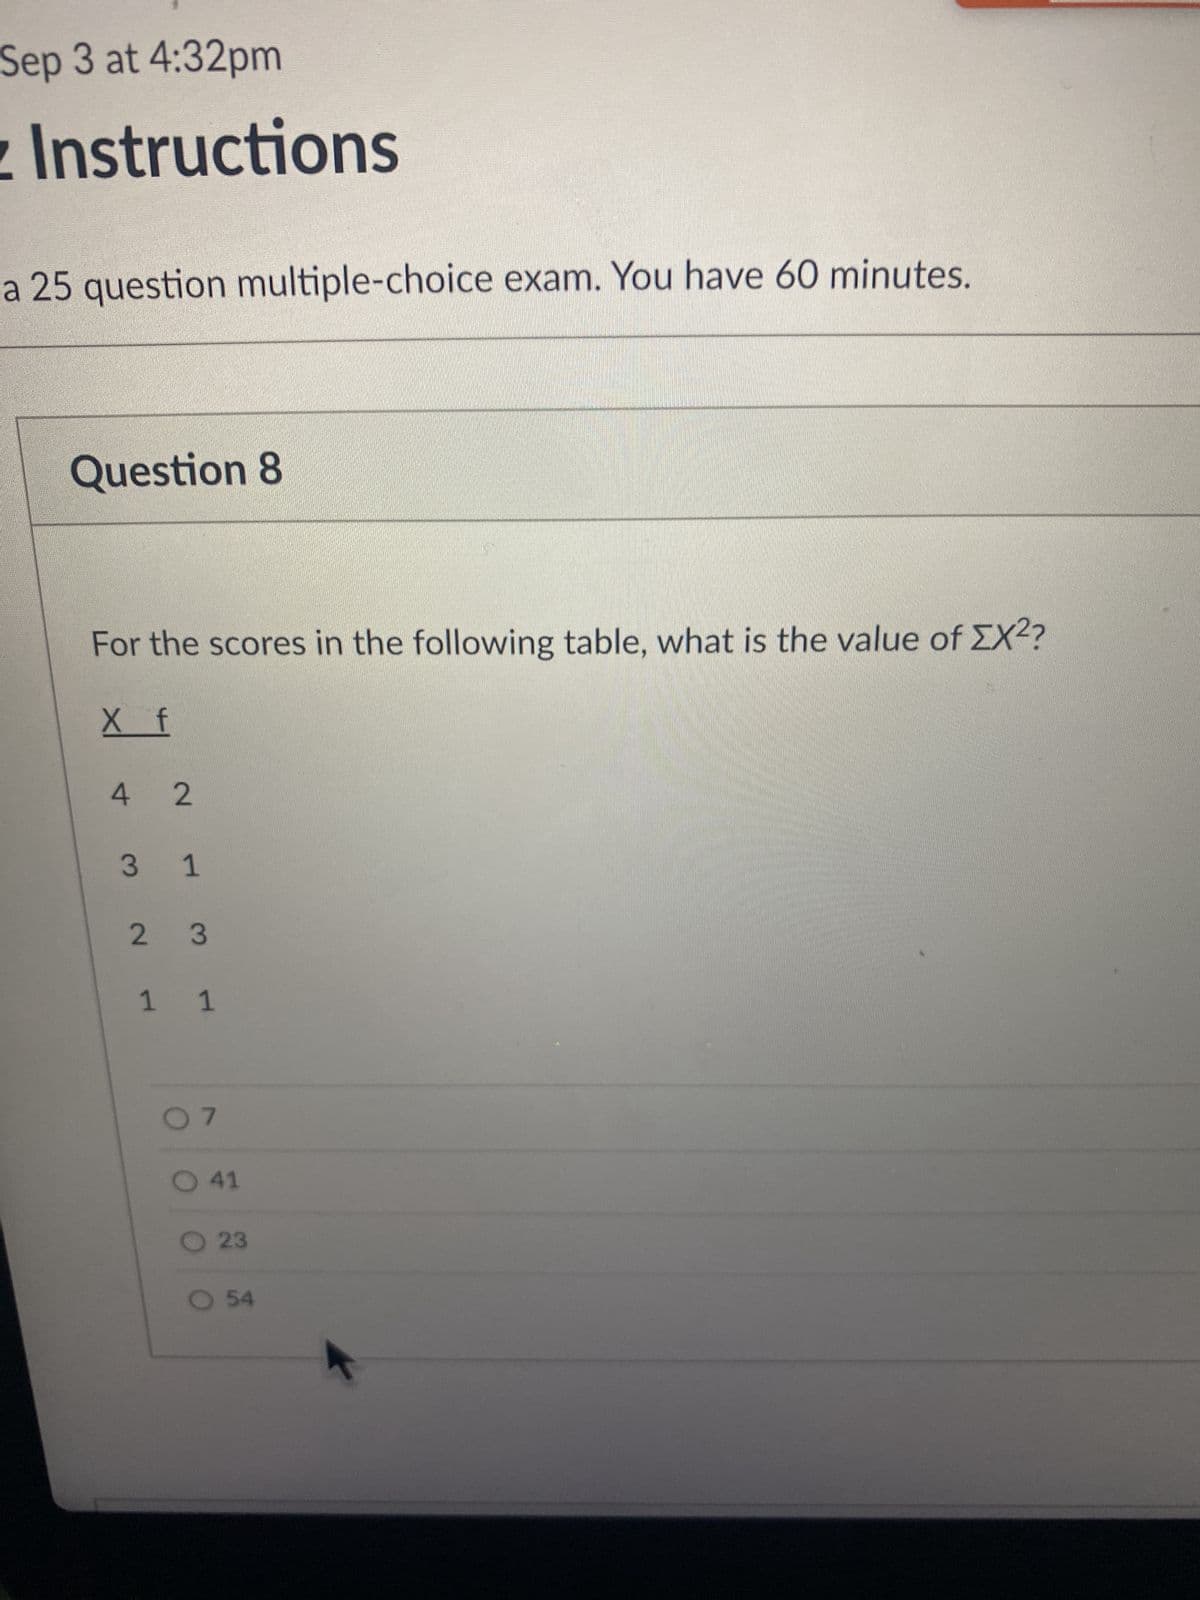 Sep 3 at 4:32pm
Instructions
a 25 question multiple-choice exam. You have 60 minutes.
Question 8
For the scores in the following table, what is the value of ΣX²?
X f
4 2
3 1
2 3
1 1
07
O41
O 23
O 54